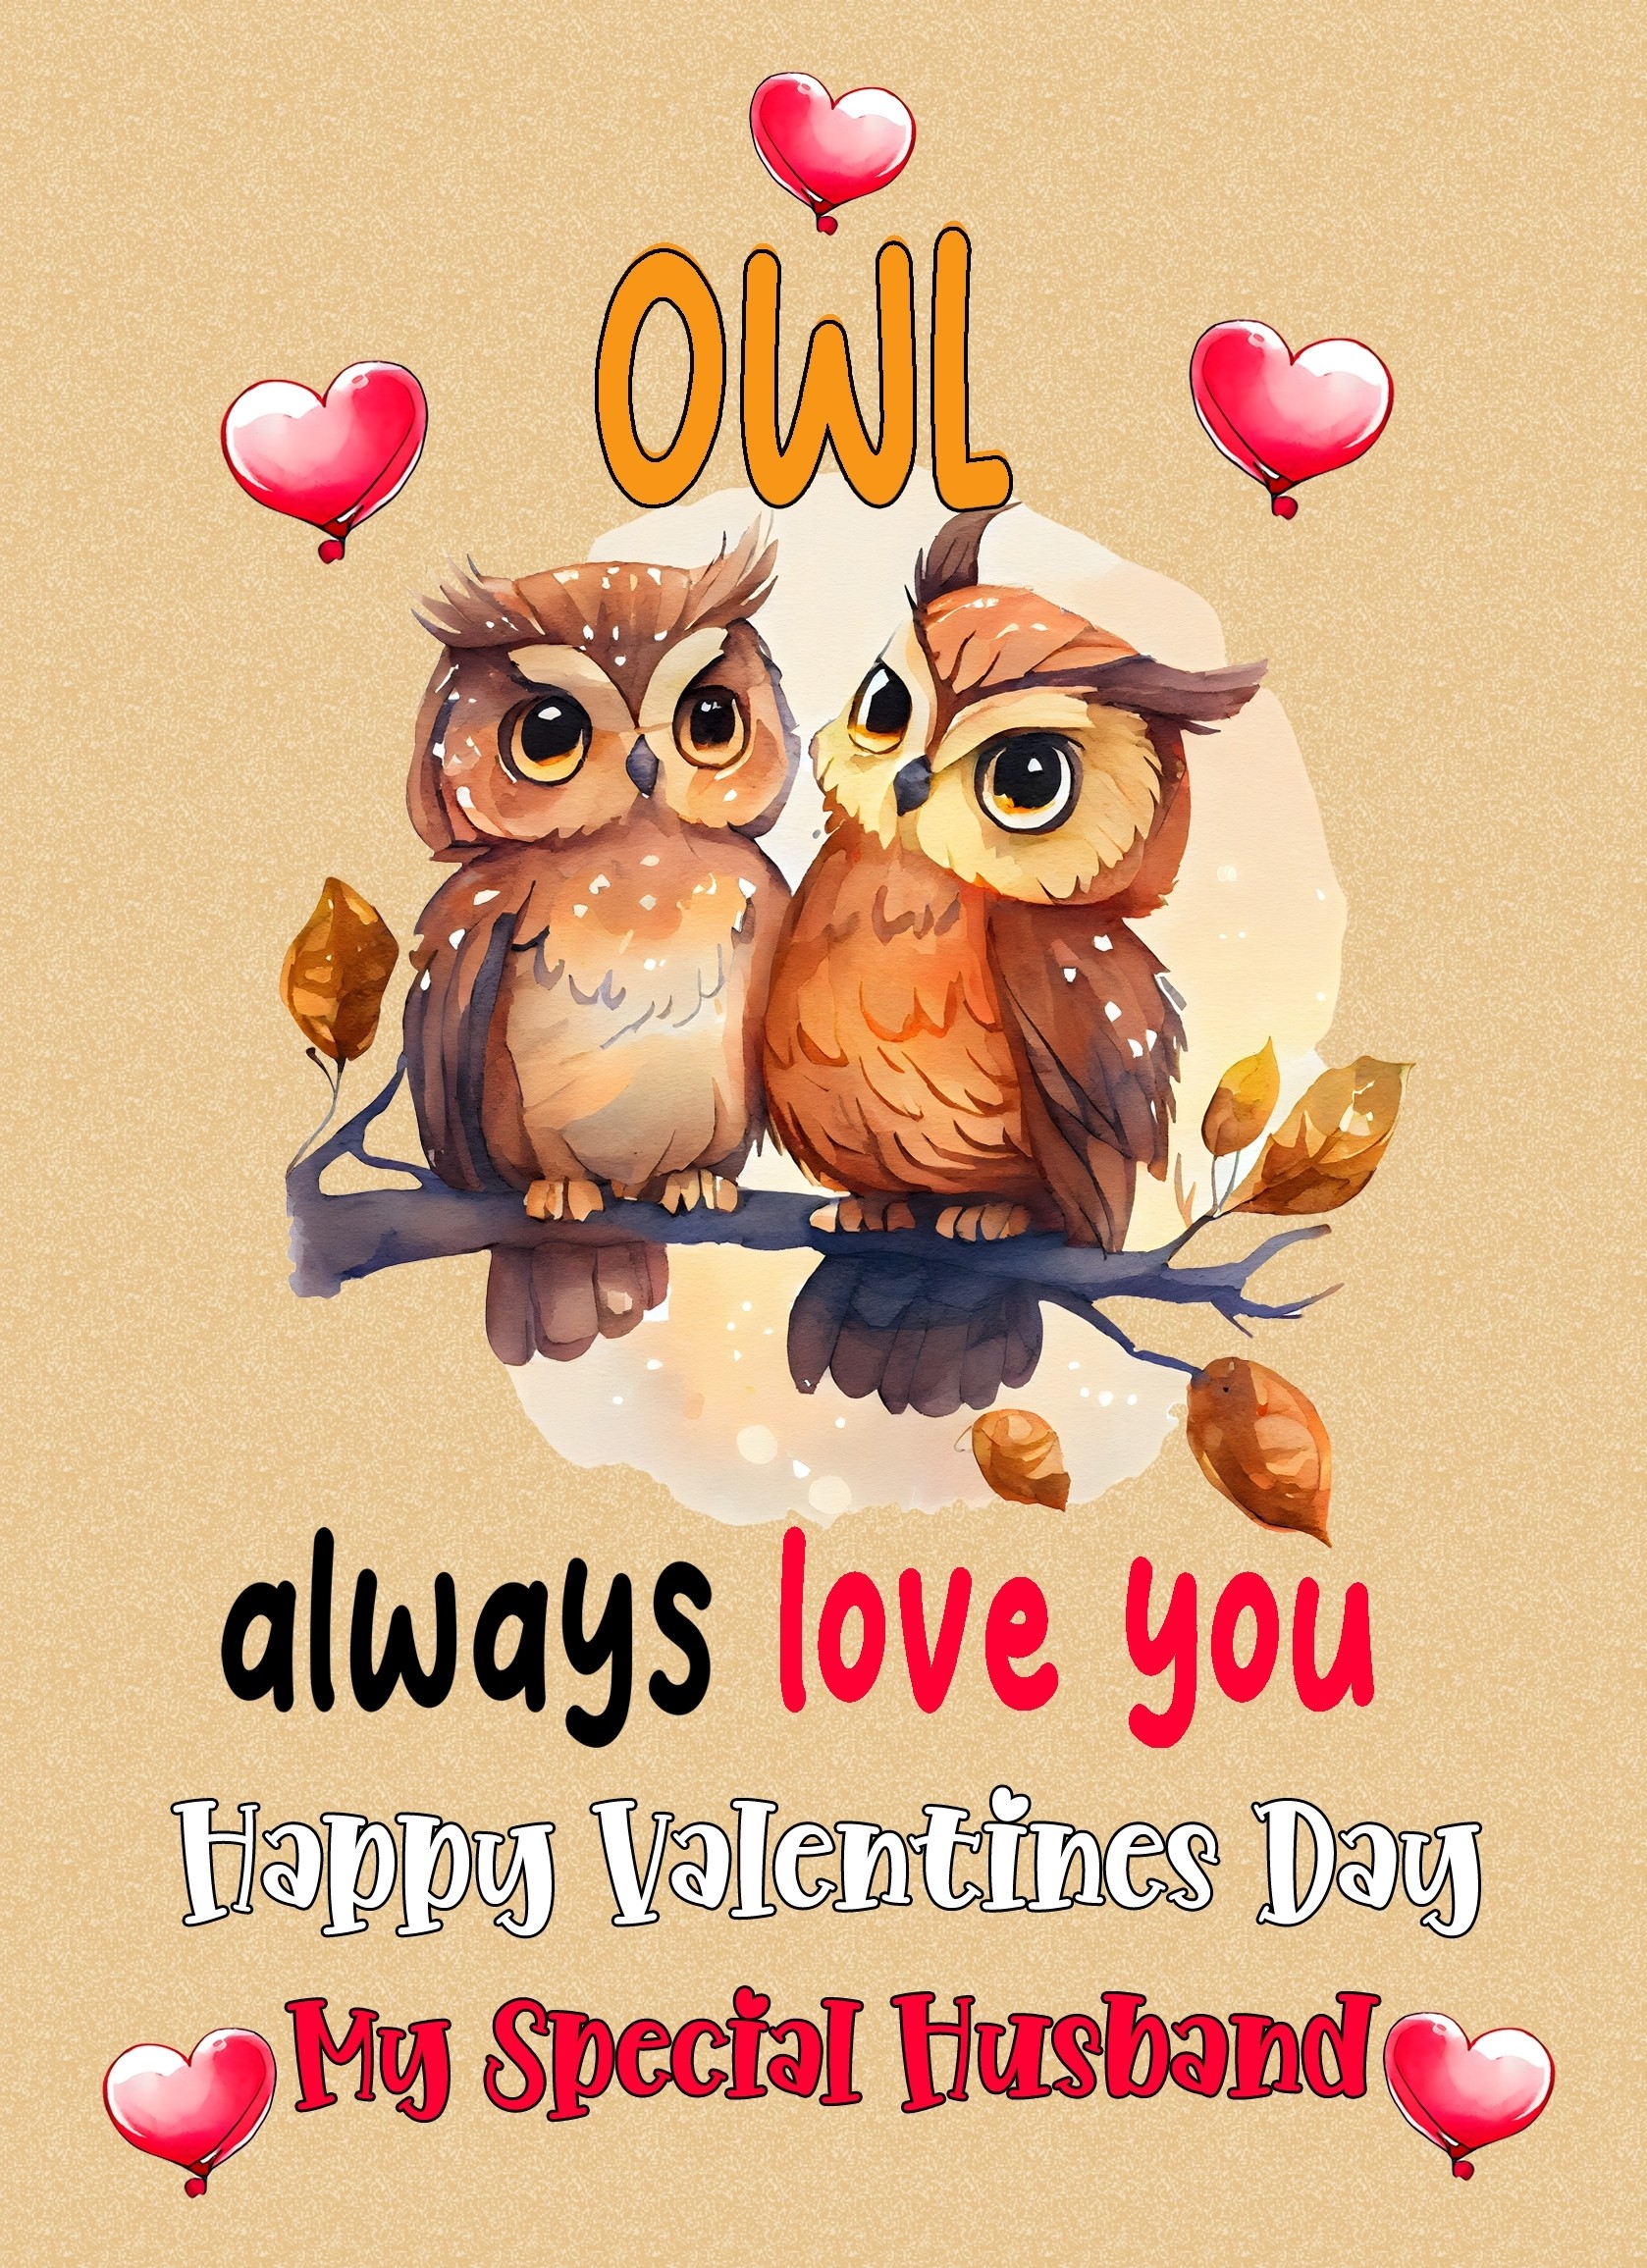 Funny Pun Valentines Day Card for Husband (Owl Always Love You)